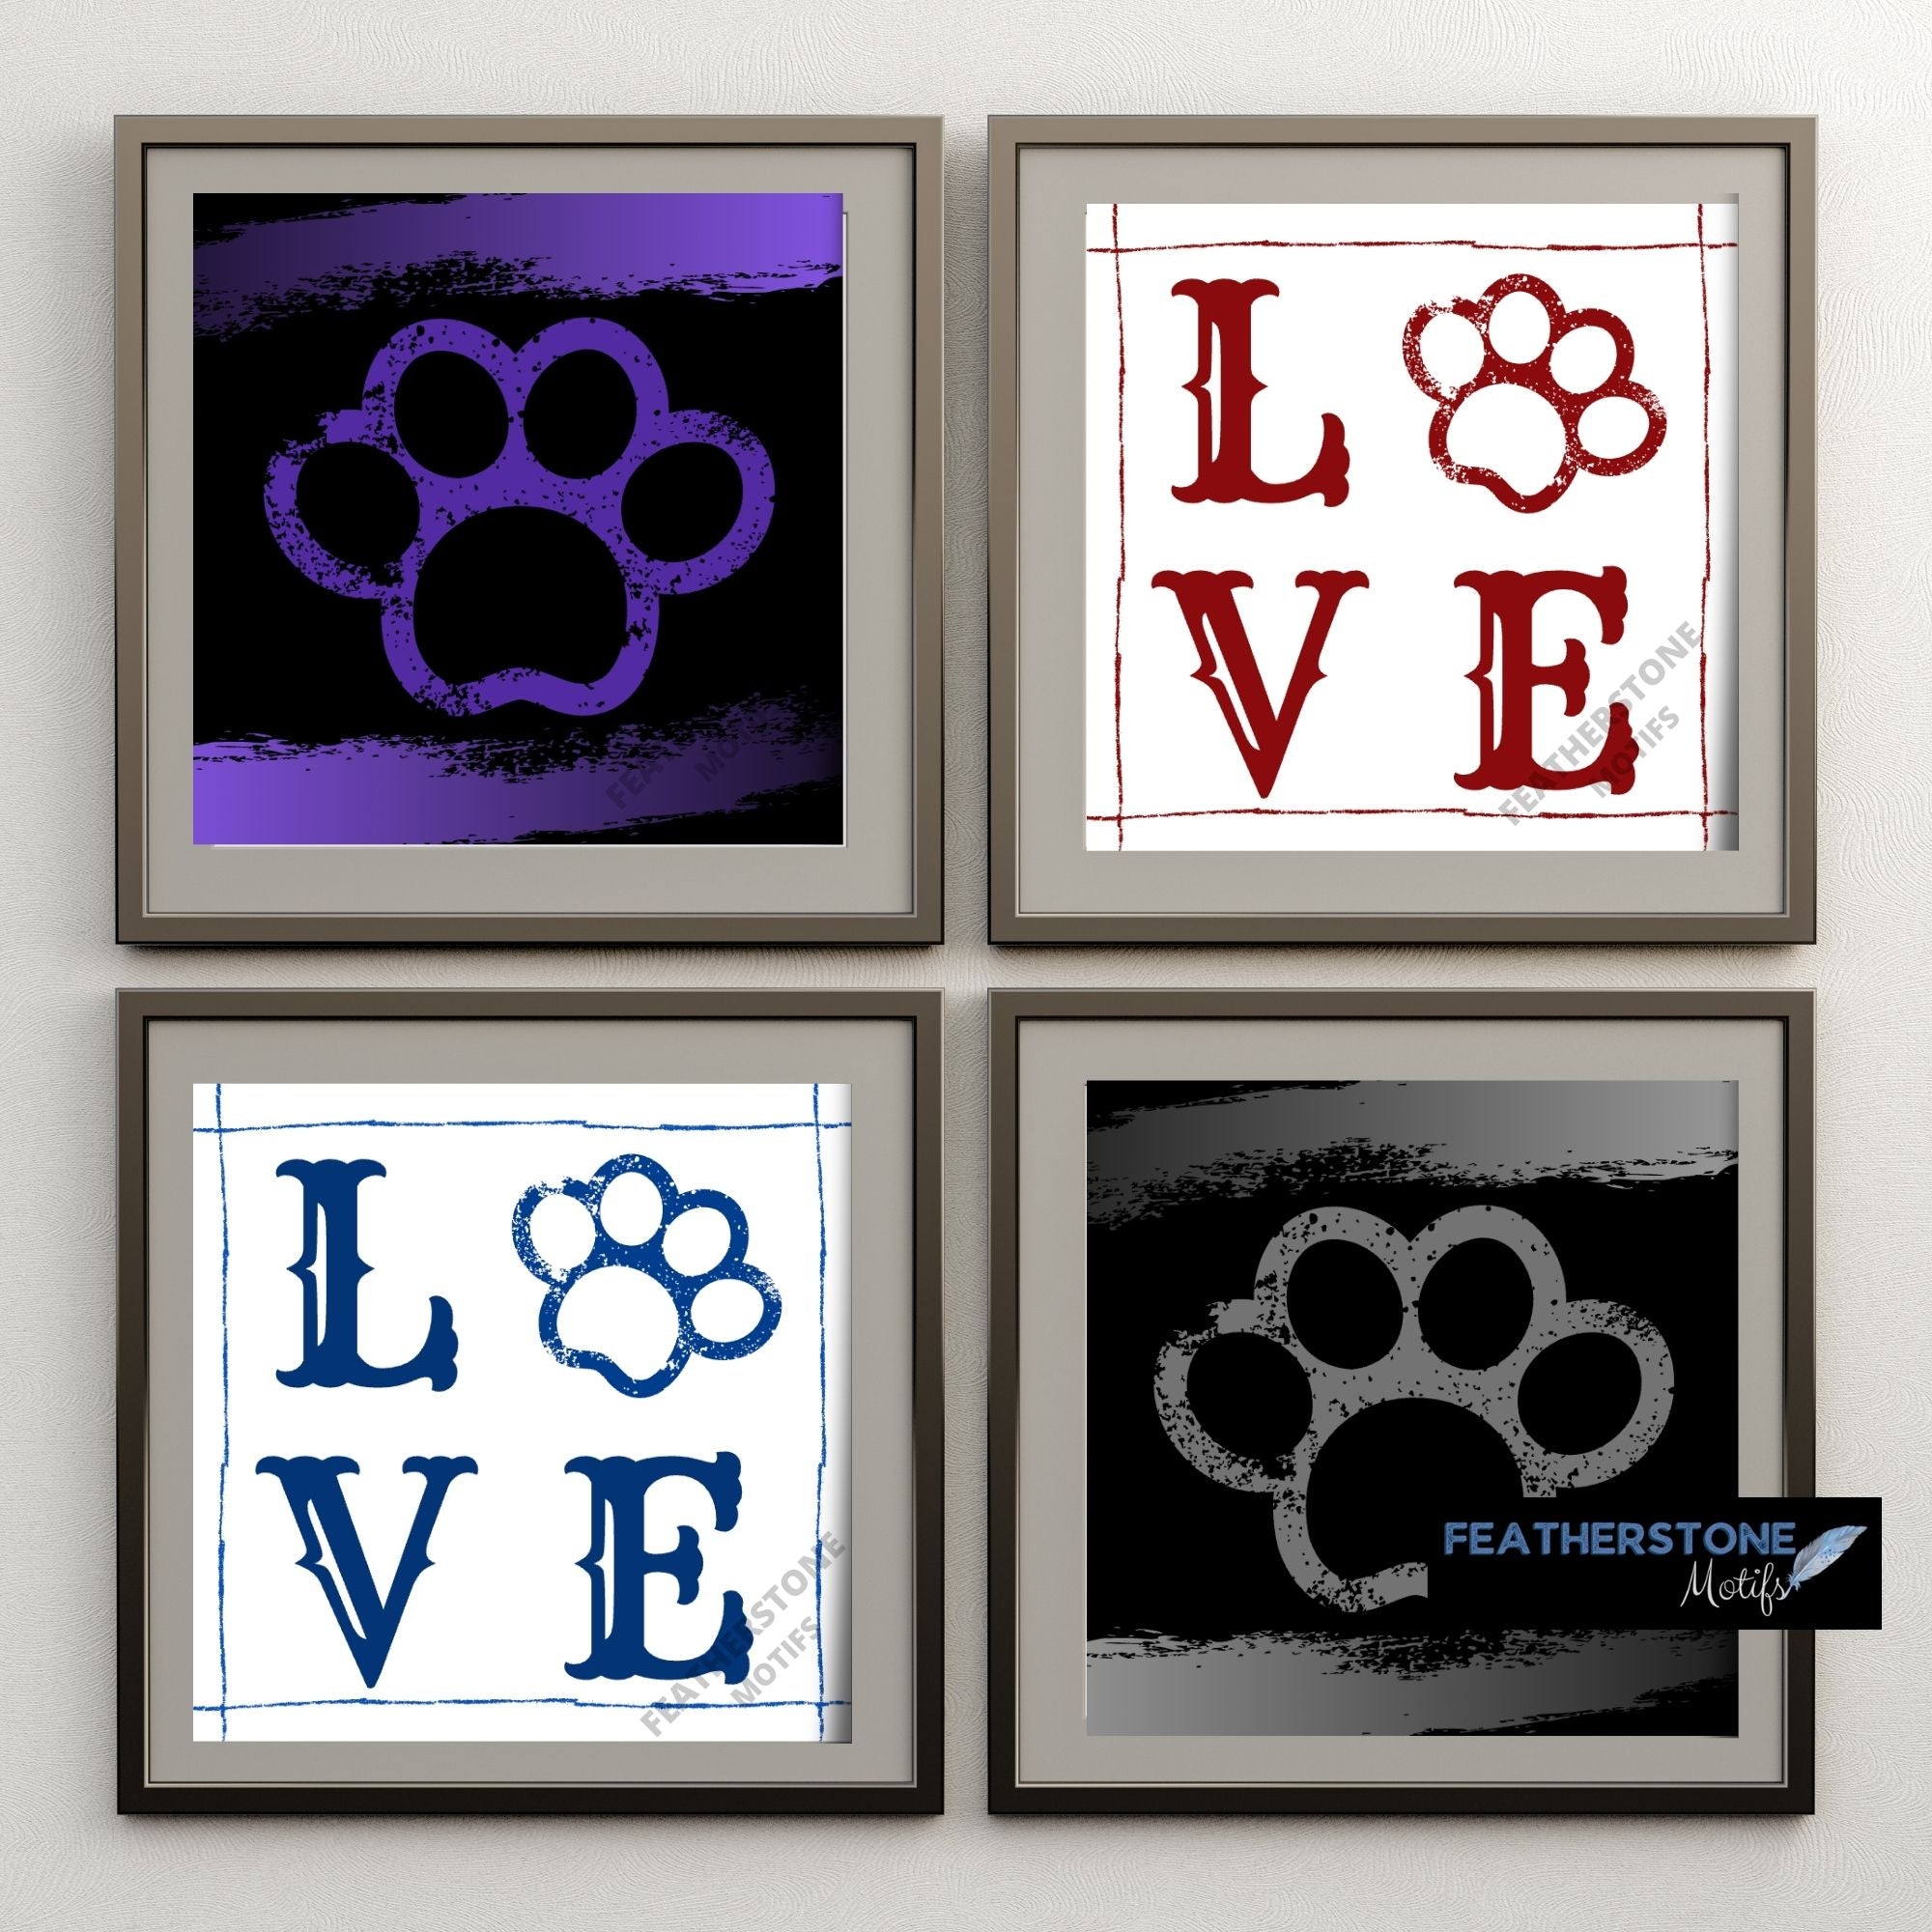 Pets are a huge part of may people's lives, so celebrate them with this set of 35 digital images! Use for craft projects like handmade coasters and greeting cards, or frame and hang them on the wall.